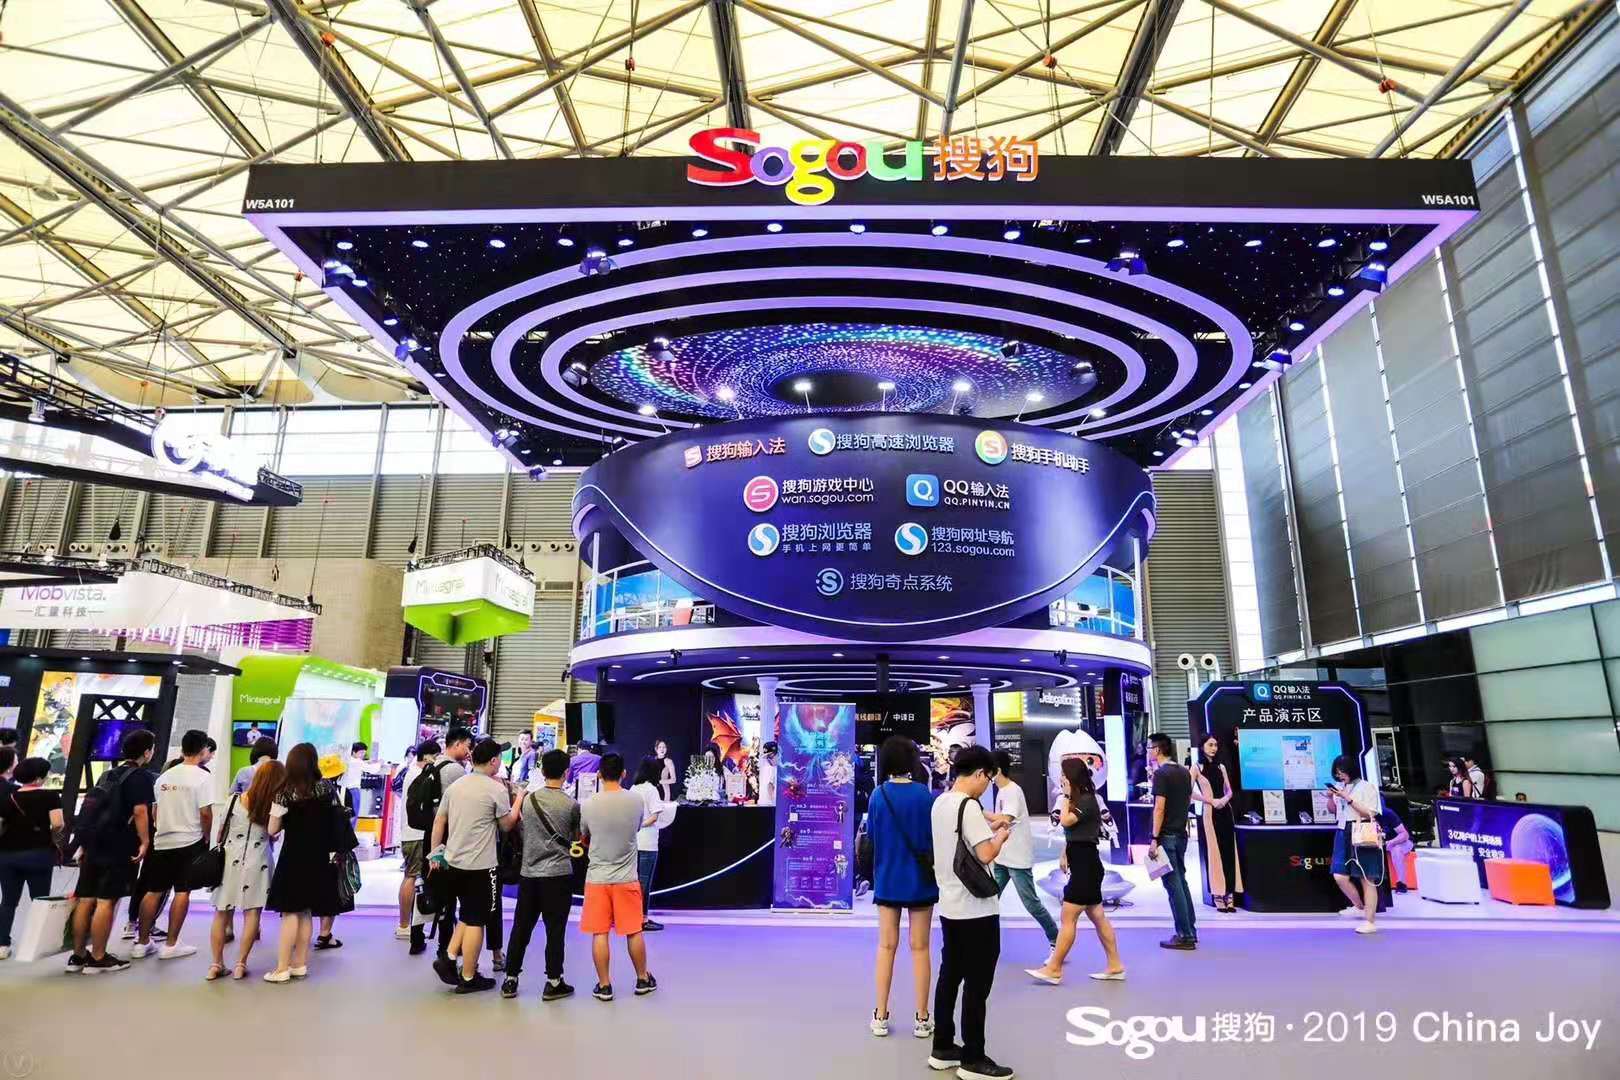 After creating the world’s first AI news anchors, Tencent-backed Sogou will unveil AI novel readers which look exactly like authors